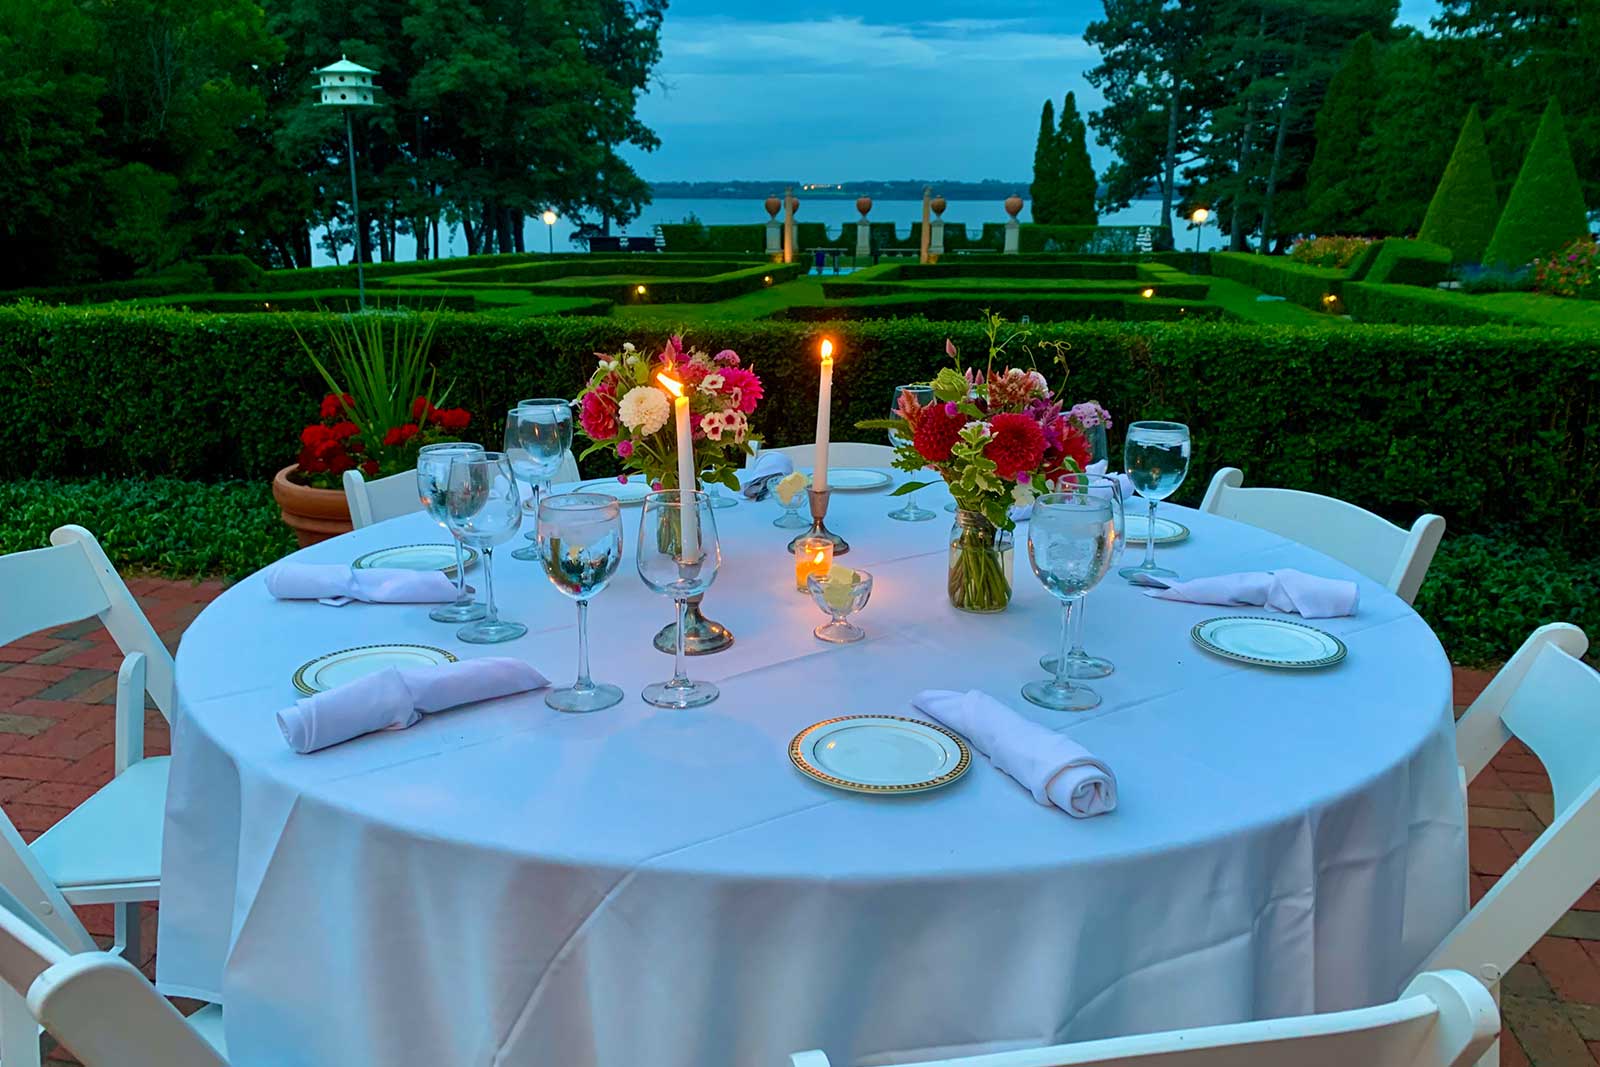 Proposal & Elopement Packages at Geneva On The Lake